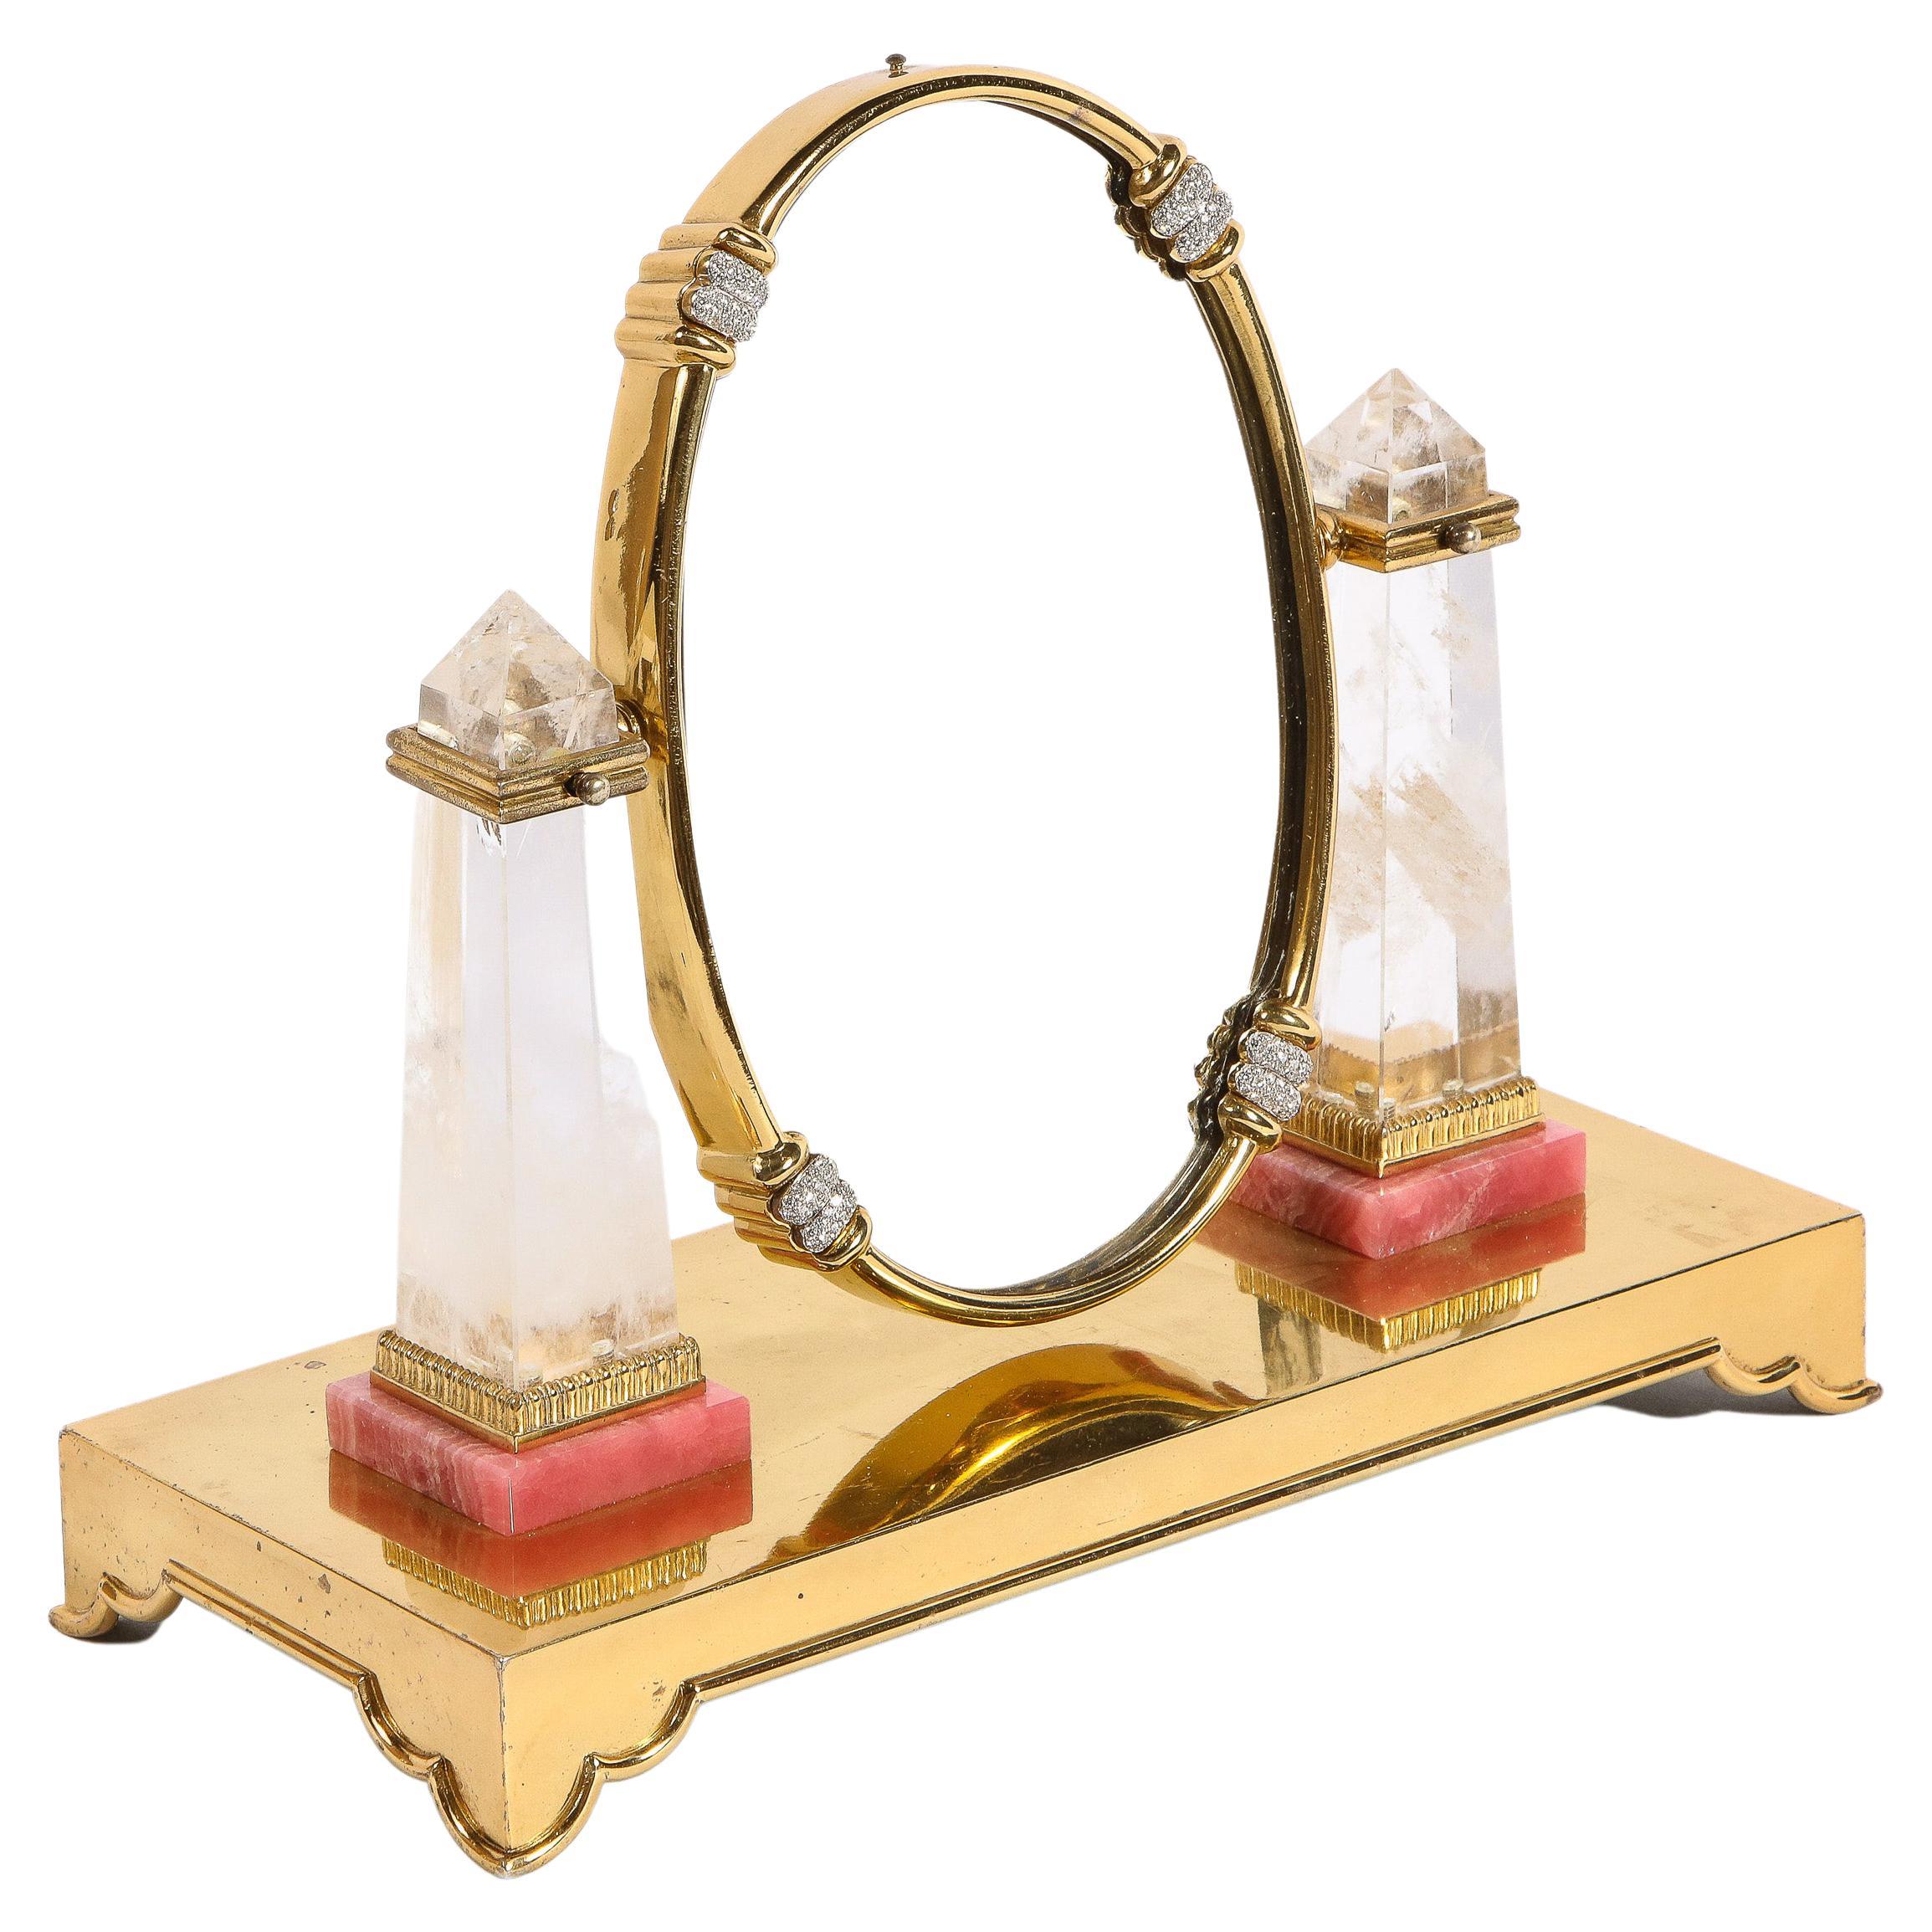 An Exquisite Italian Silver-Gilt, Diamond, Rock Crystal, and Rhodochrosite Vanity Mirror, by Moba Italy.

Circa 1950

Very fine and impressive vanity mirror made in solid sterling gilt, with two rock crystal obelisks, mounted to rhodochrosite. 8